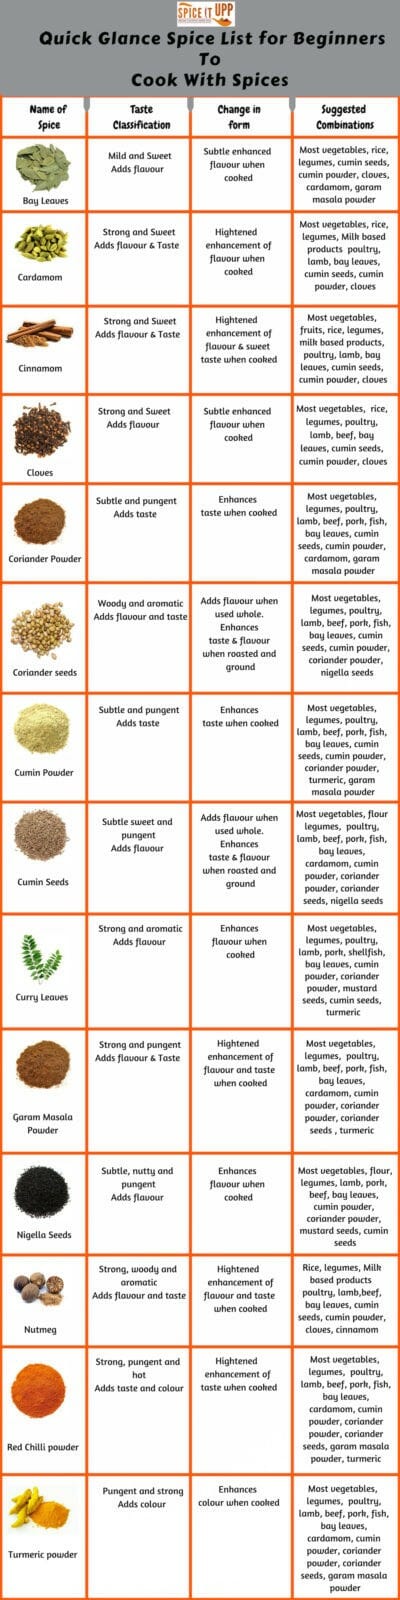 Spice infographic of List of spices for beginners for cooking with spices and their uses